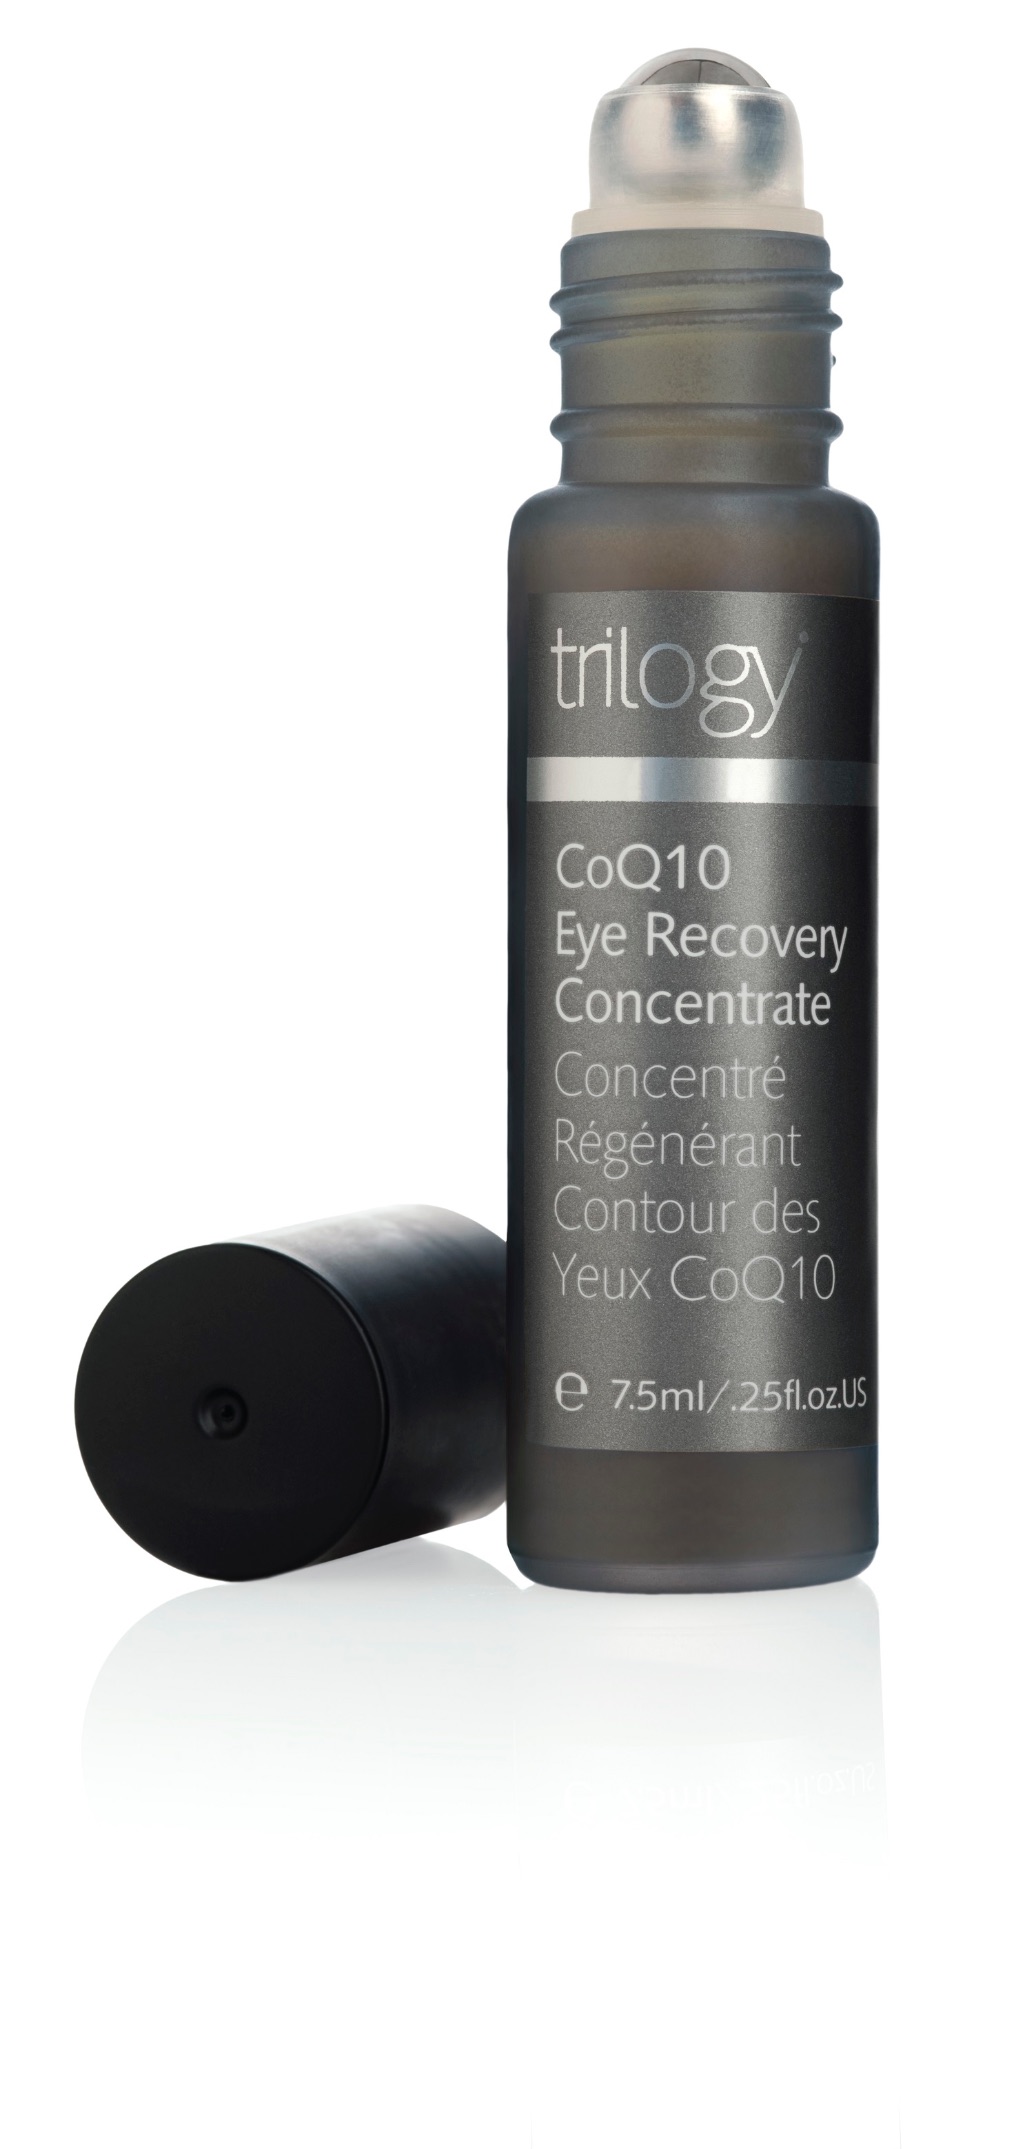 Trilogy CoQ10 Eye Recovery Concentrate 7.5ml